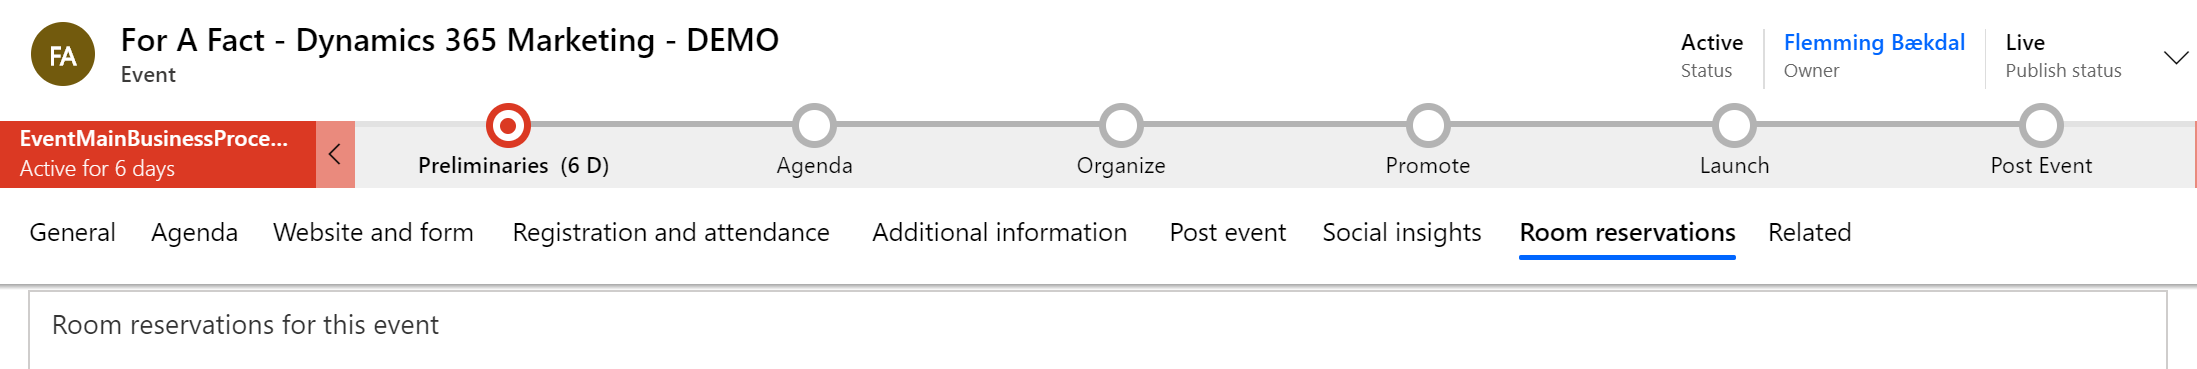 Dynamics 365 Marketing - For A Fact Event Room Reservations